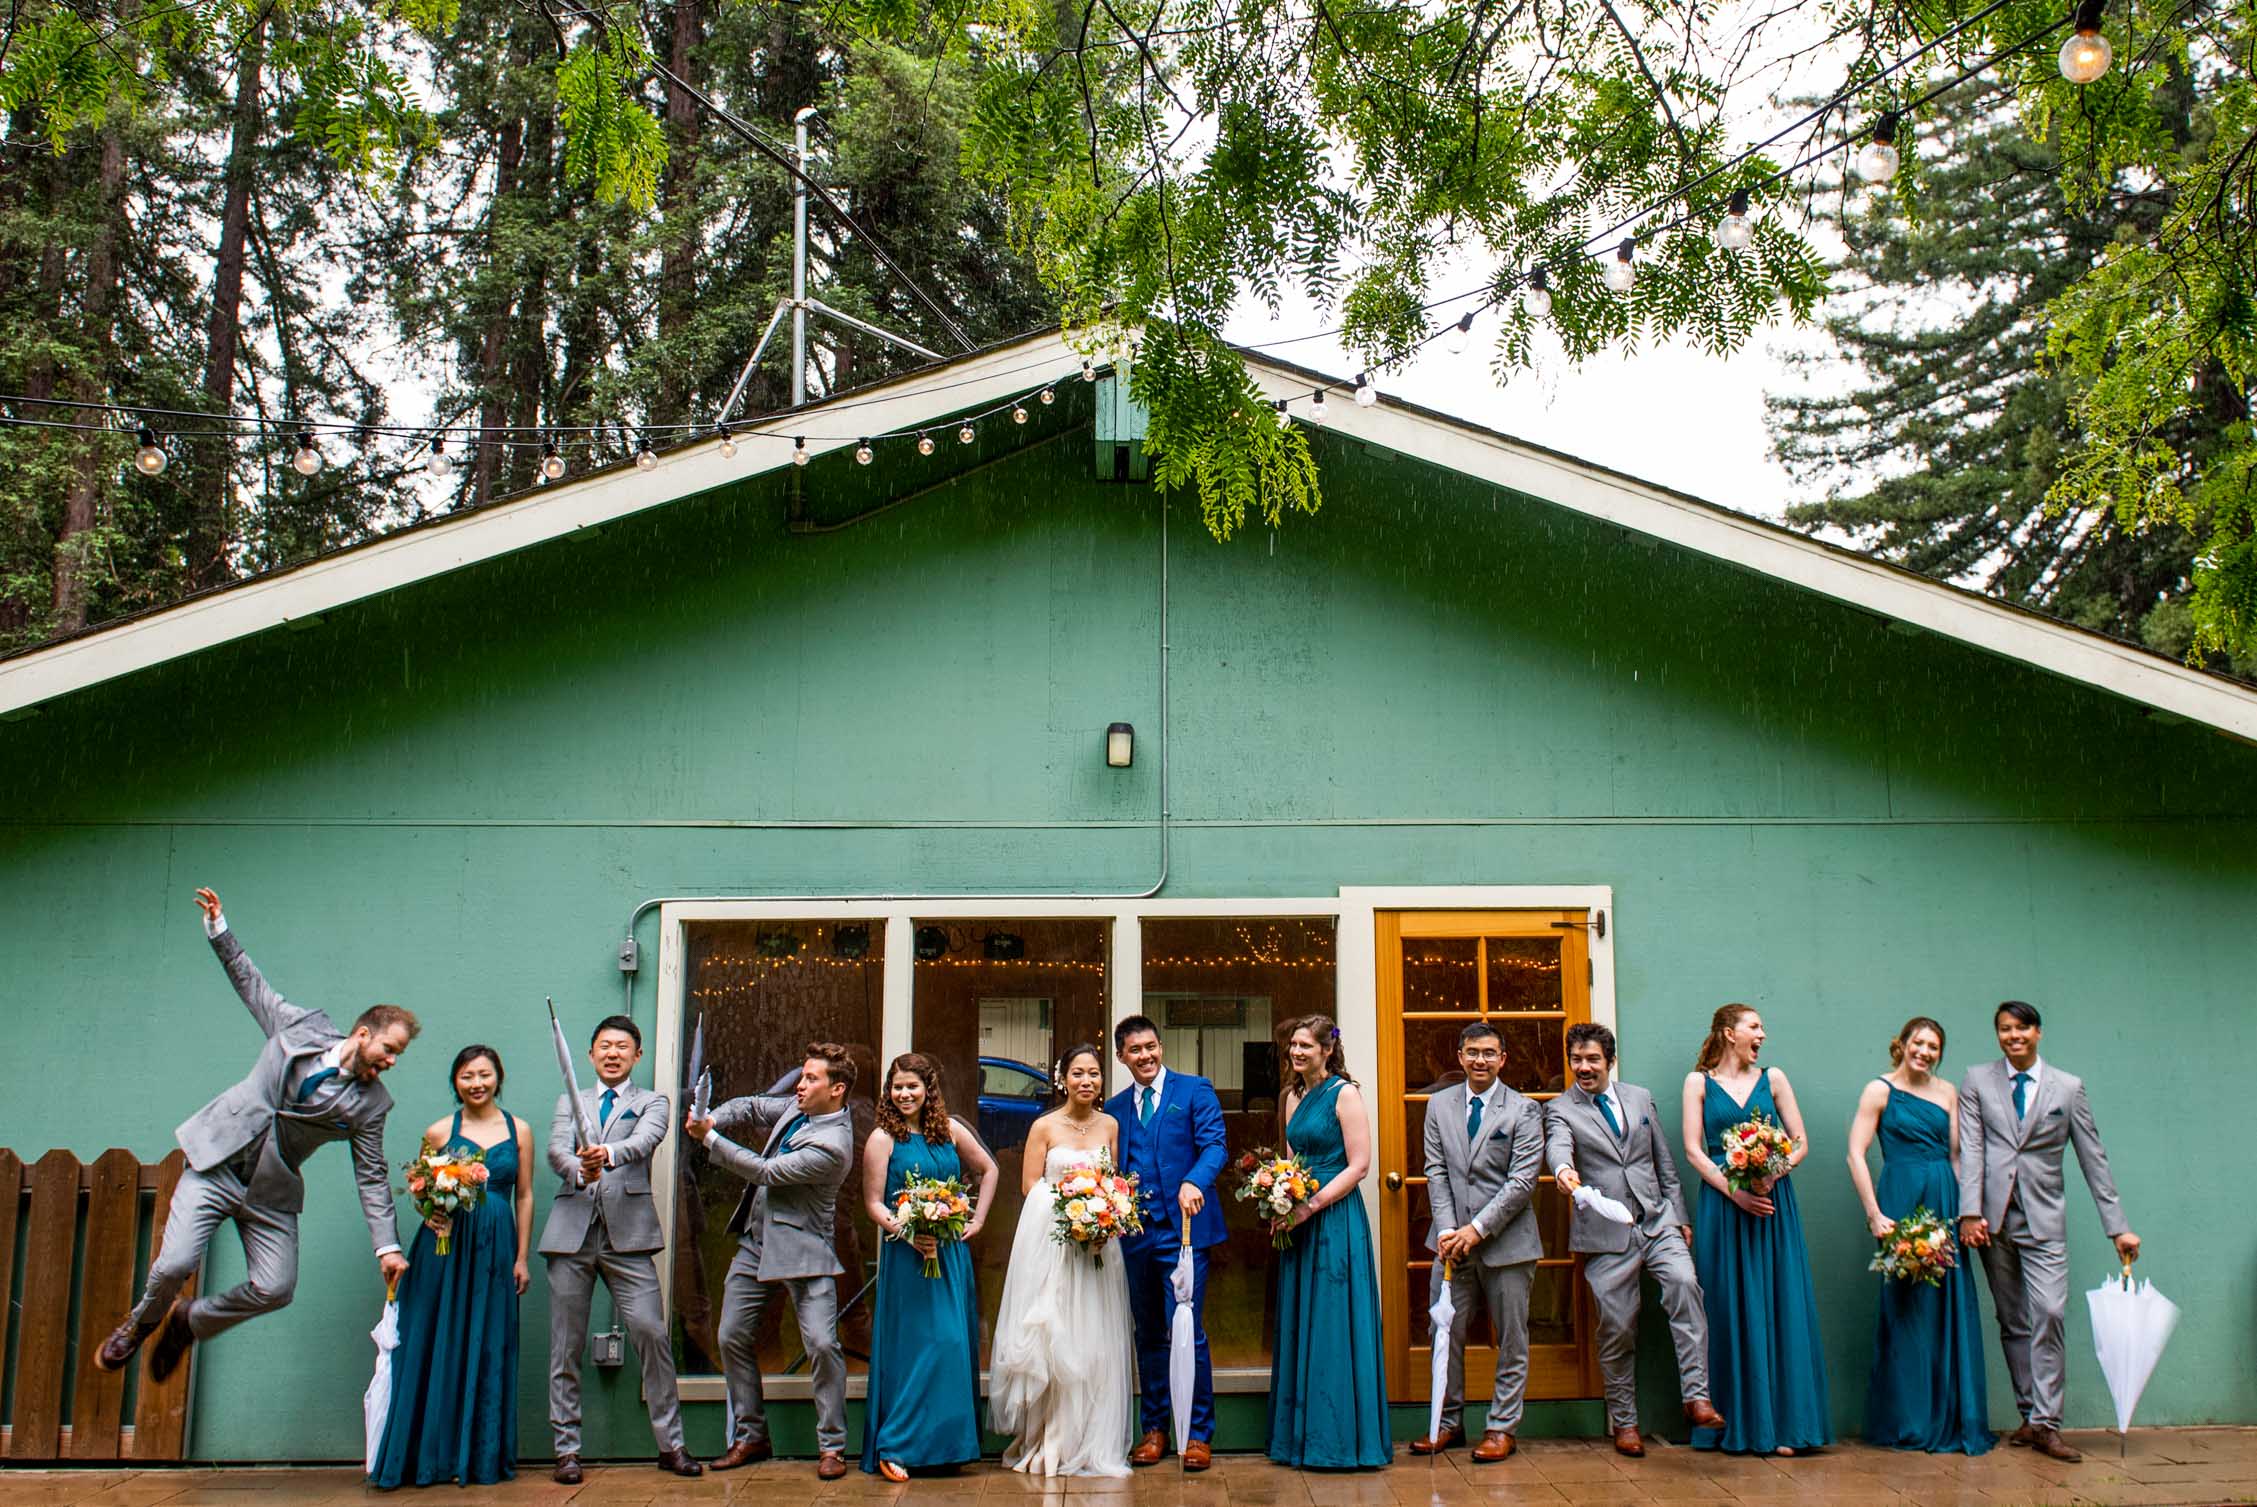 Large wedding party lined up under the awning of teal house with umbrellas